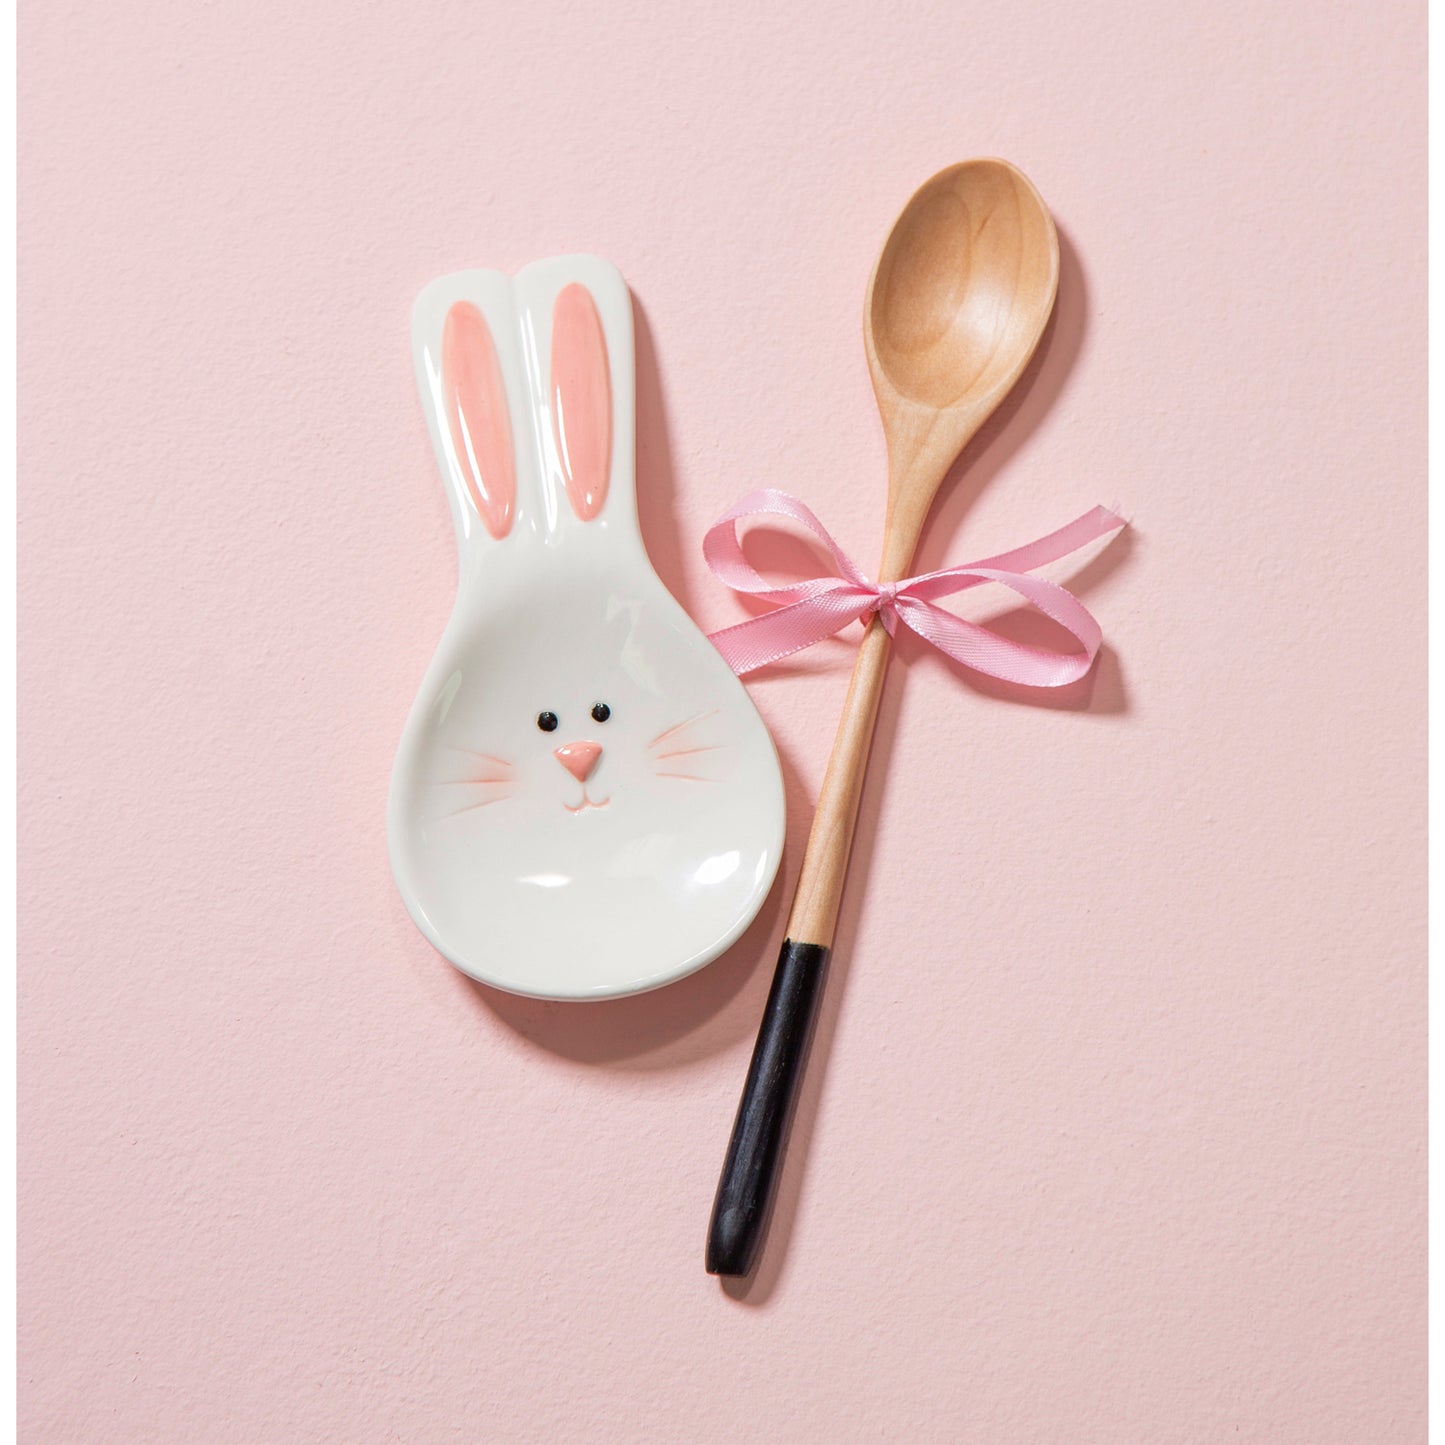 Ceramic Bunny Spoon Rest with Wooden Spoon